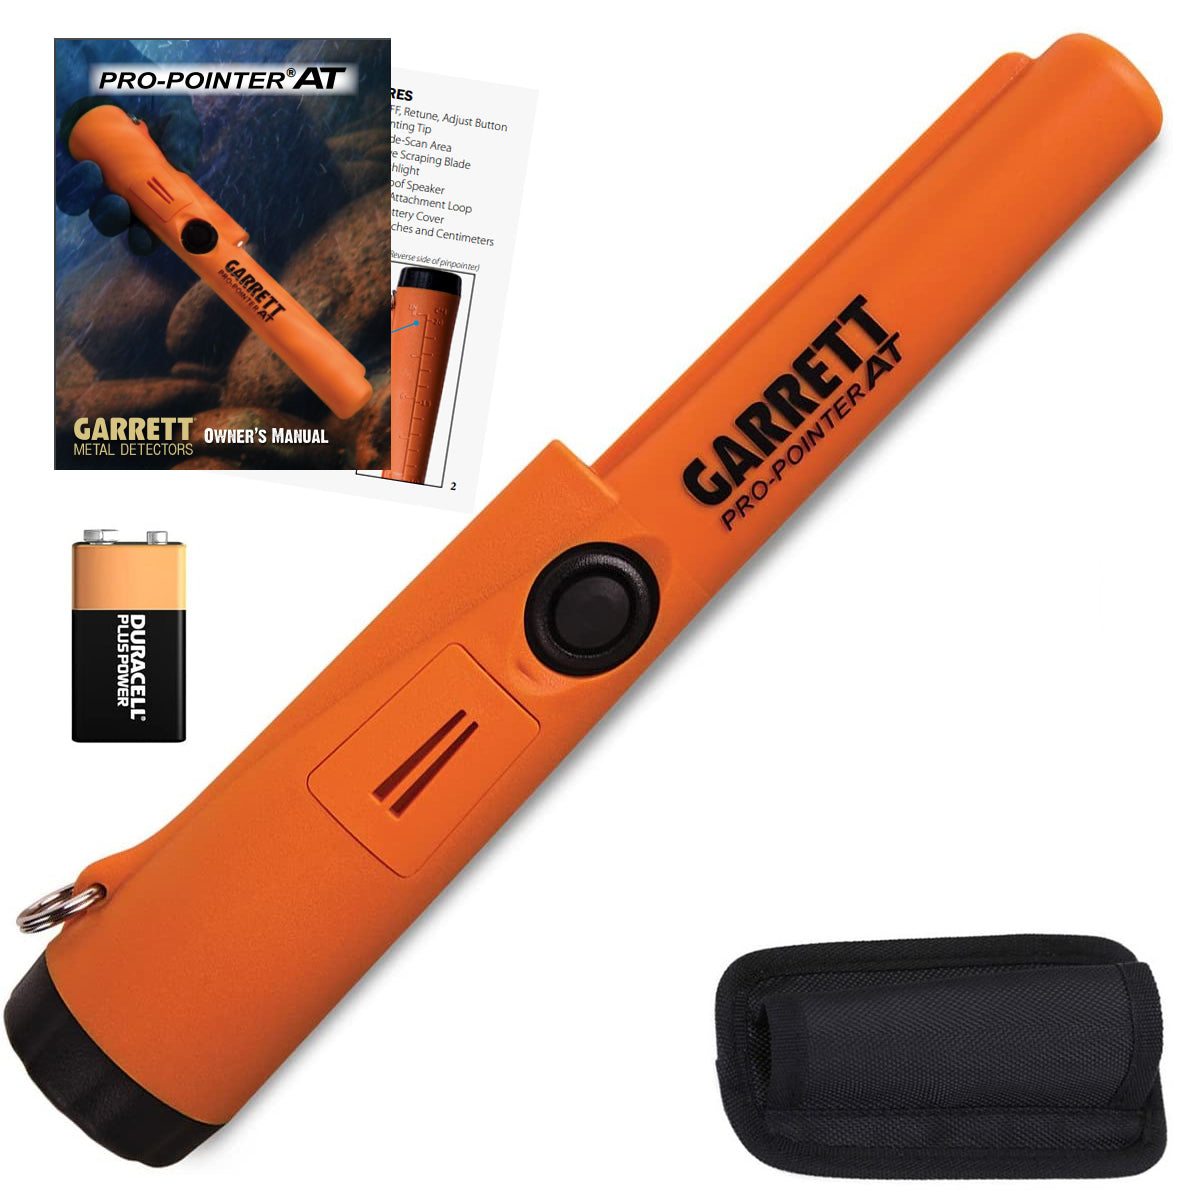 Garrett Pro-Pointer AT pinpointing metal detector, Shop, Features